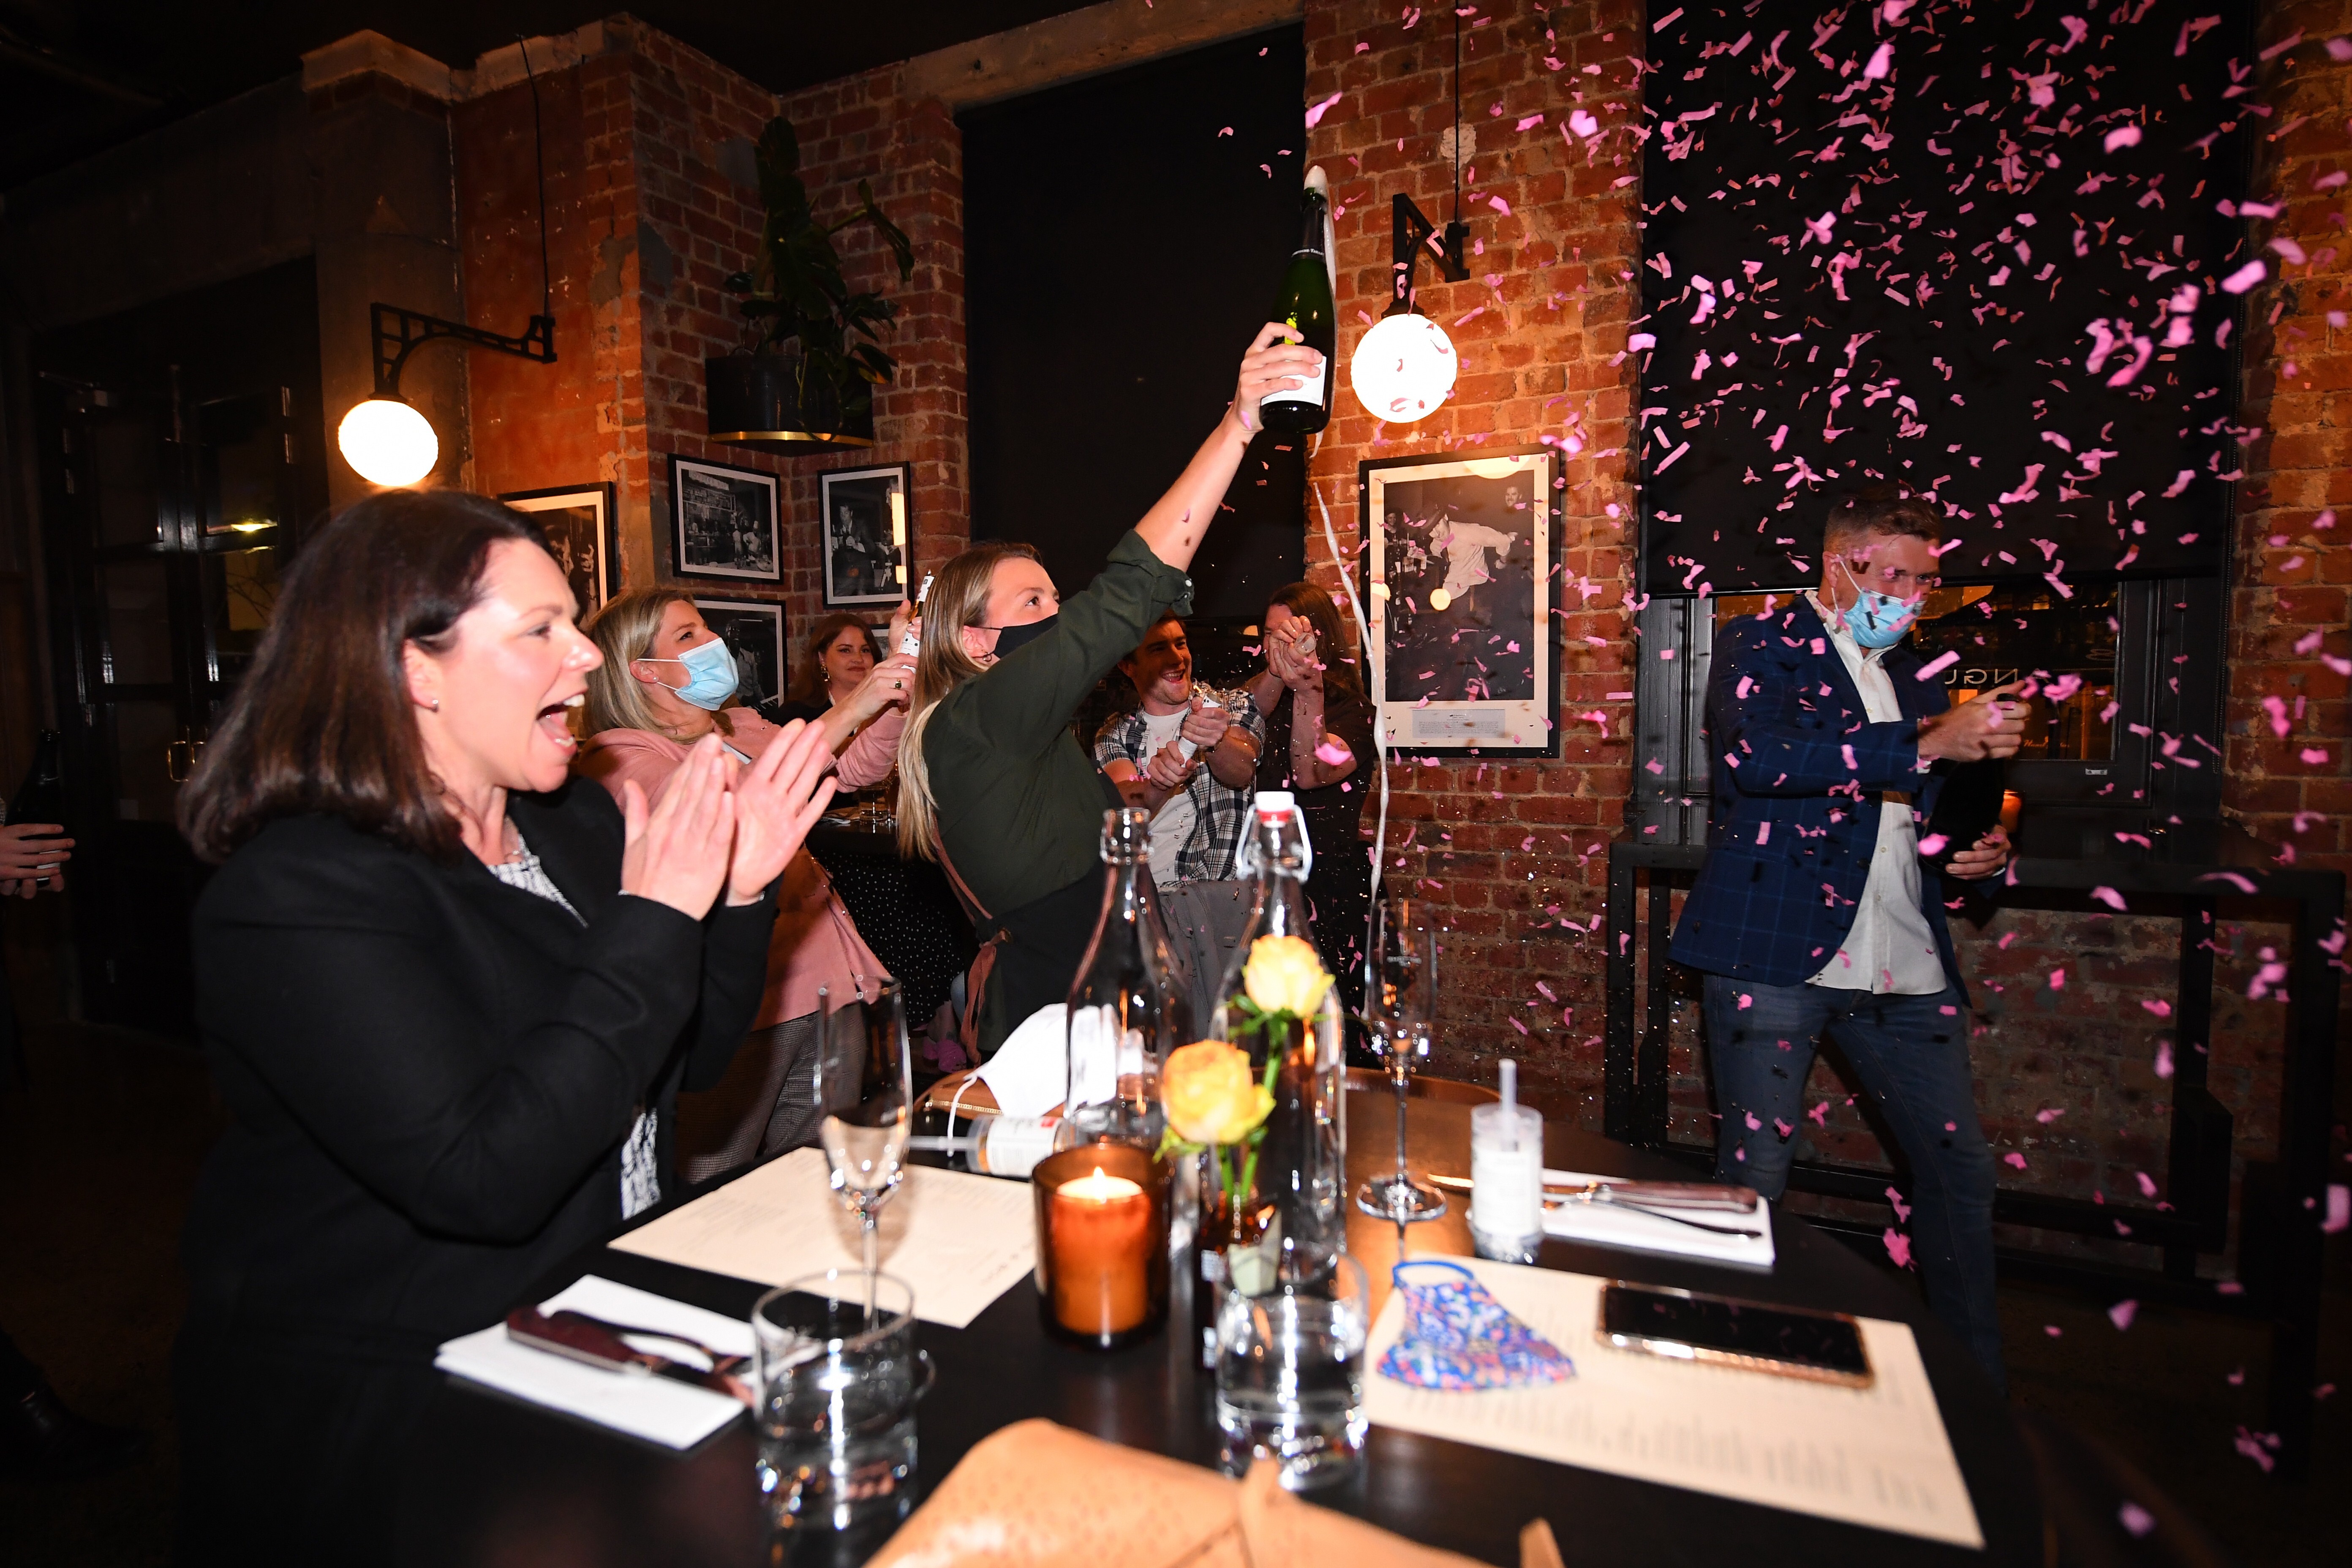 Patrons and staff celebrate the end of Melbourne’s coronavirus lockdown at a steakhouse on Wednesday. Photo: EPA